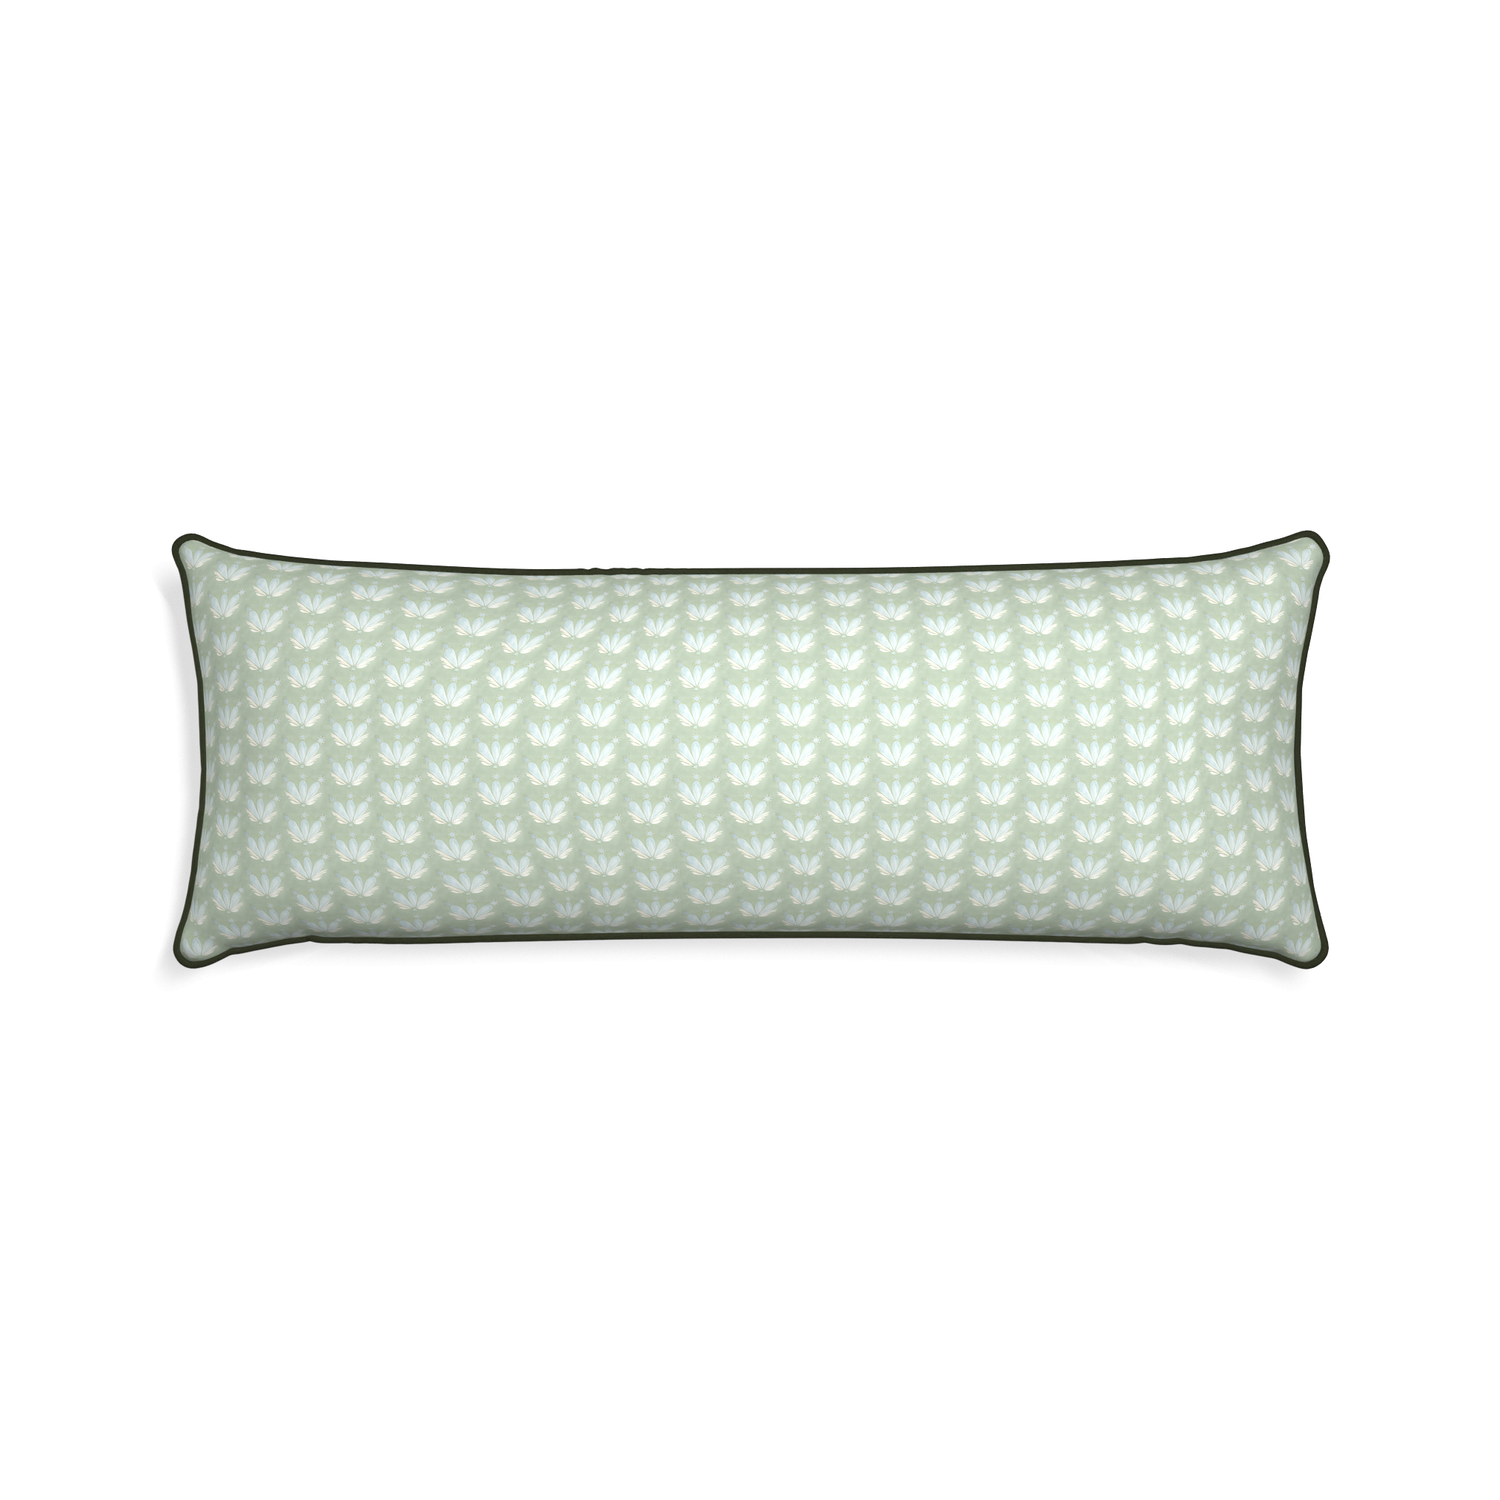 Xl-lumbar serena sea salt custom blue & green floral drop repeatpillow with f piping on white background